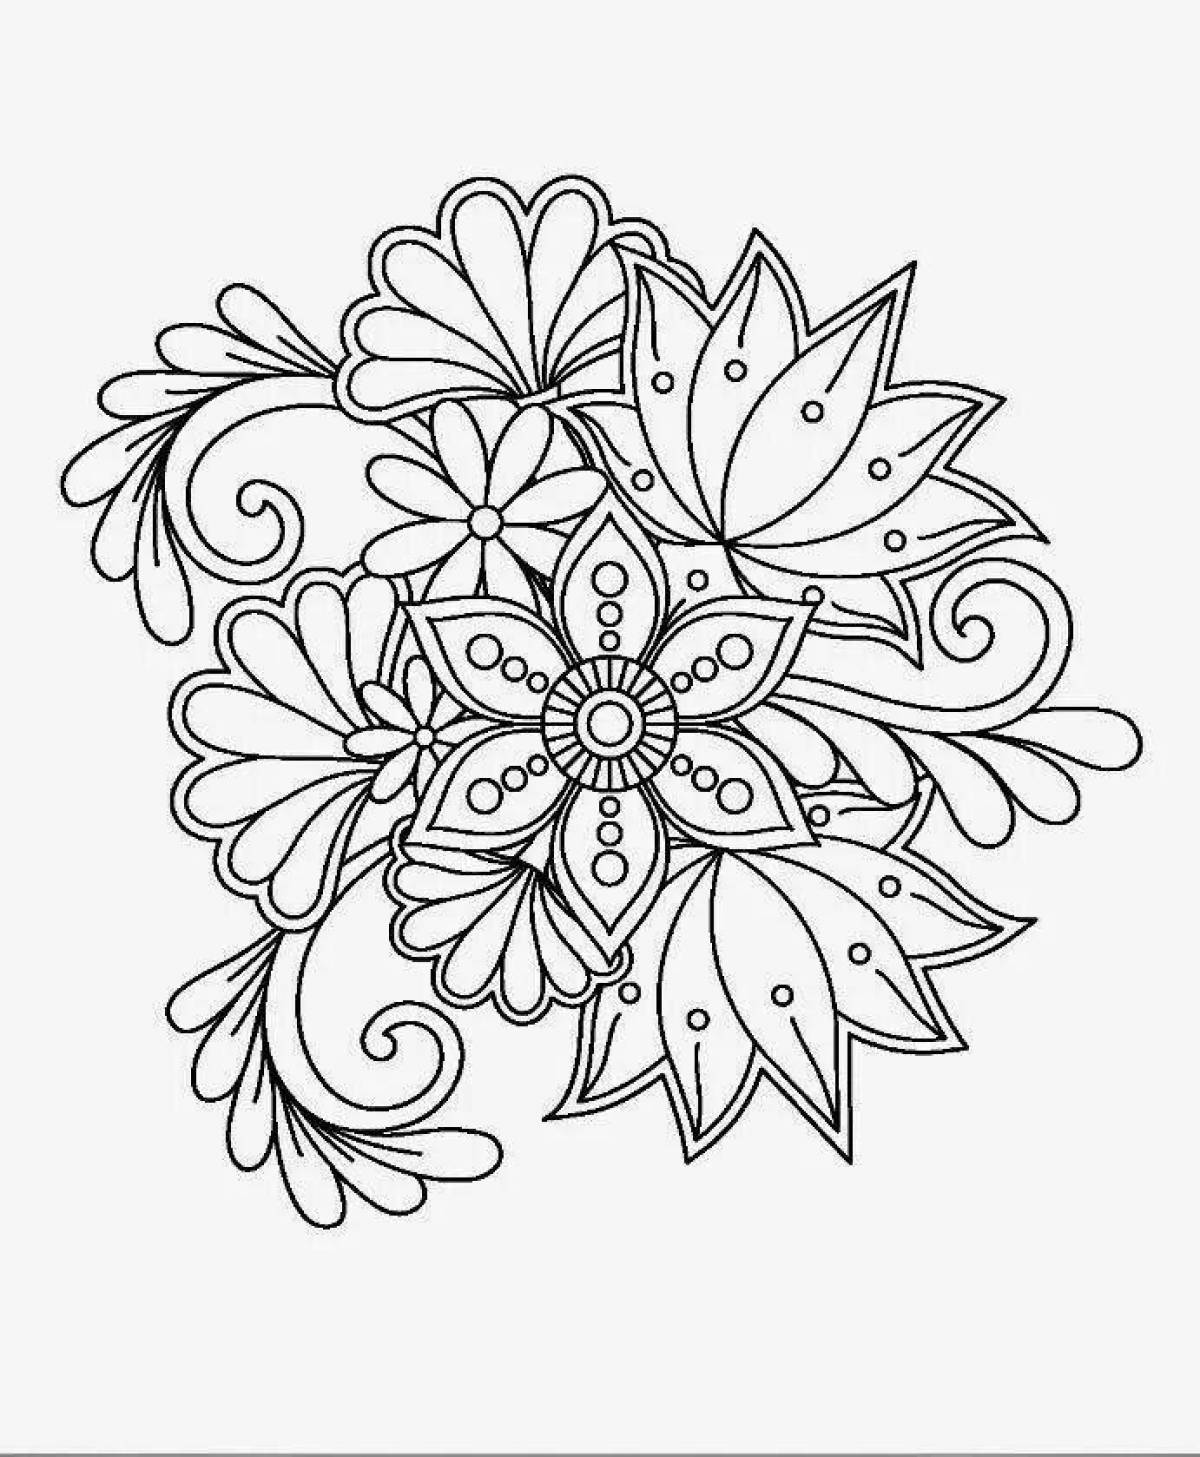 Adorable coloring book with a pattern